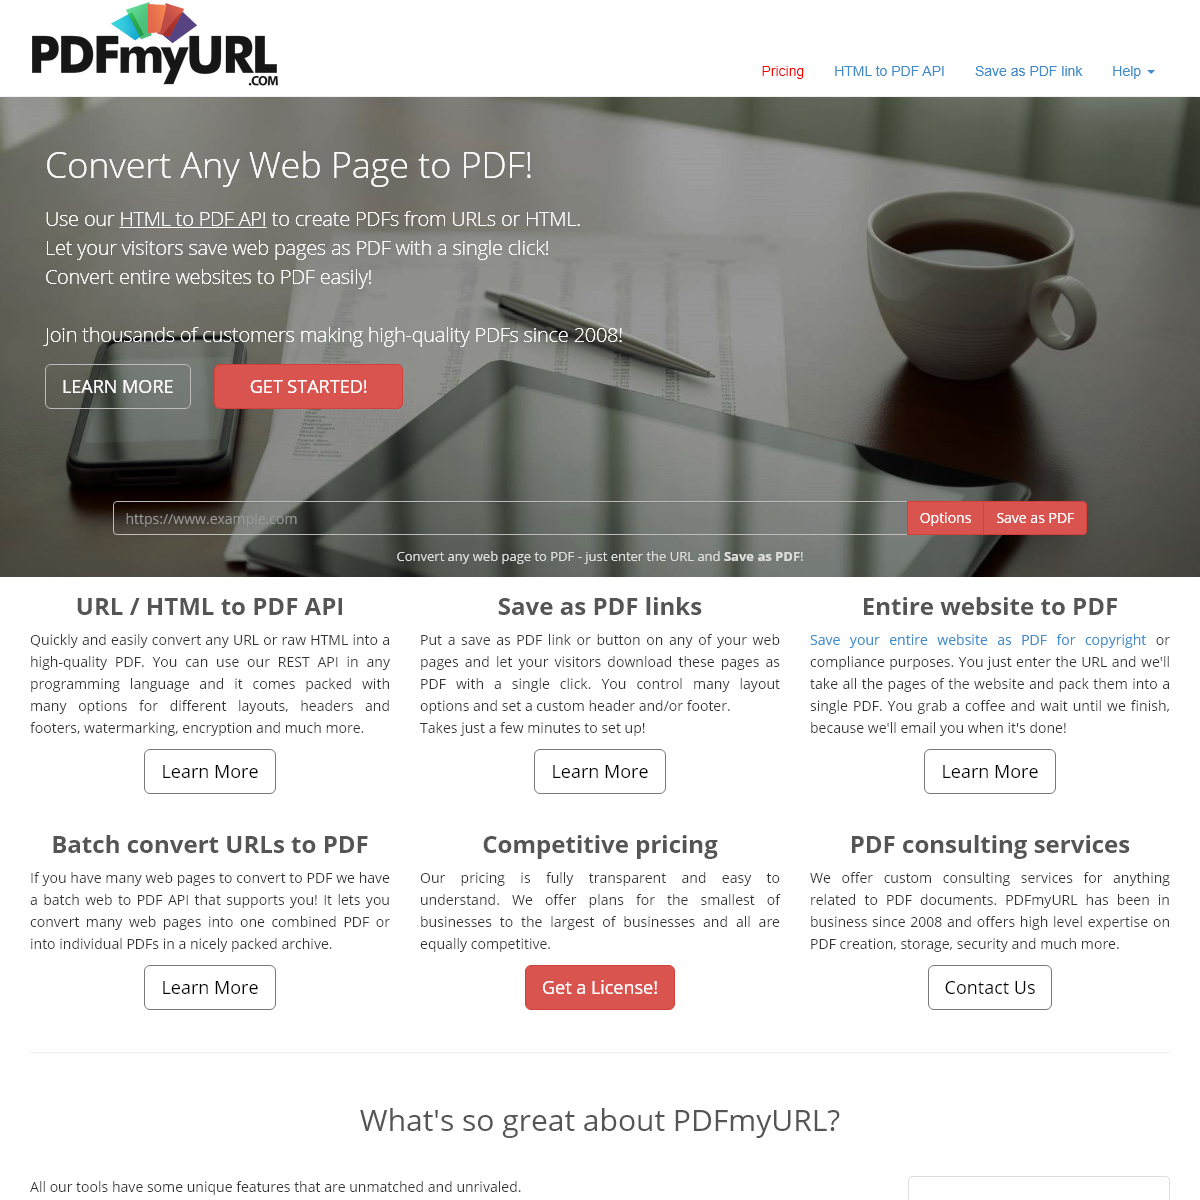 A complete backup of pdfmyurl.com